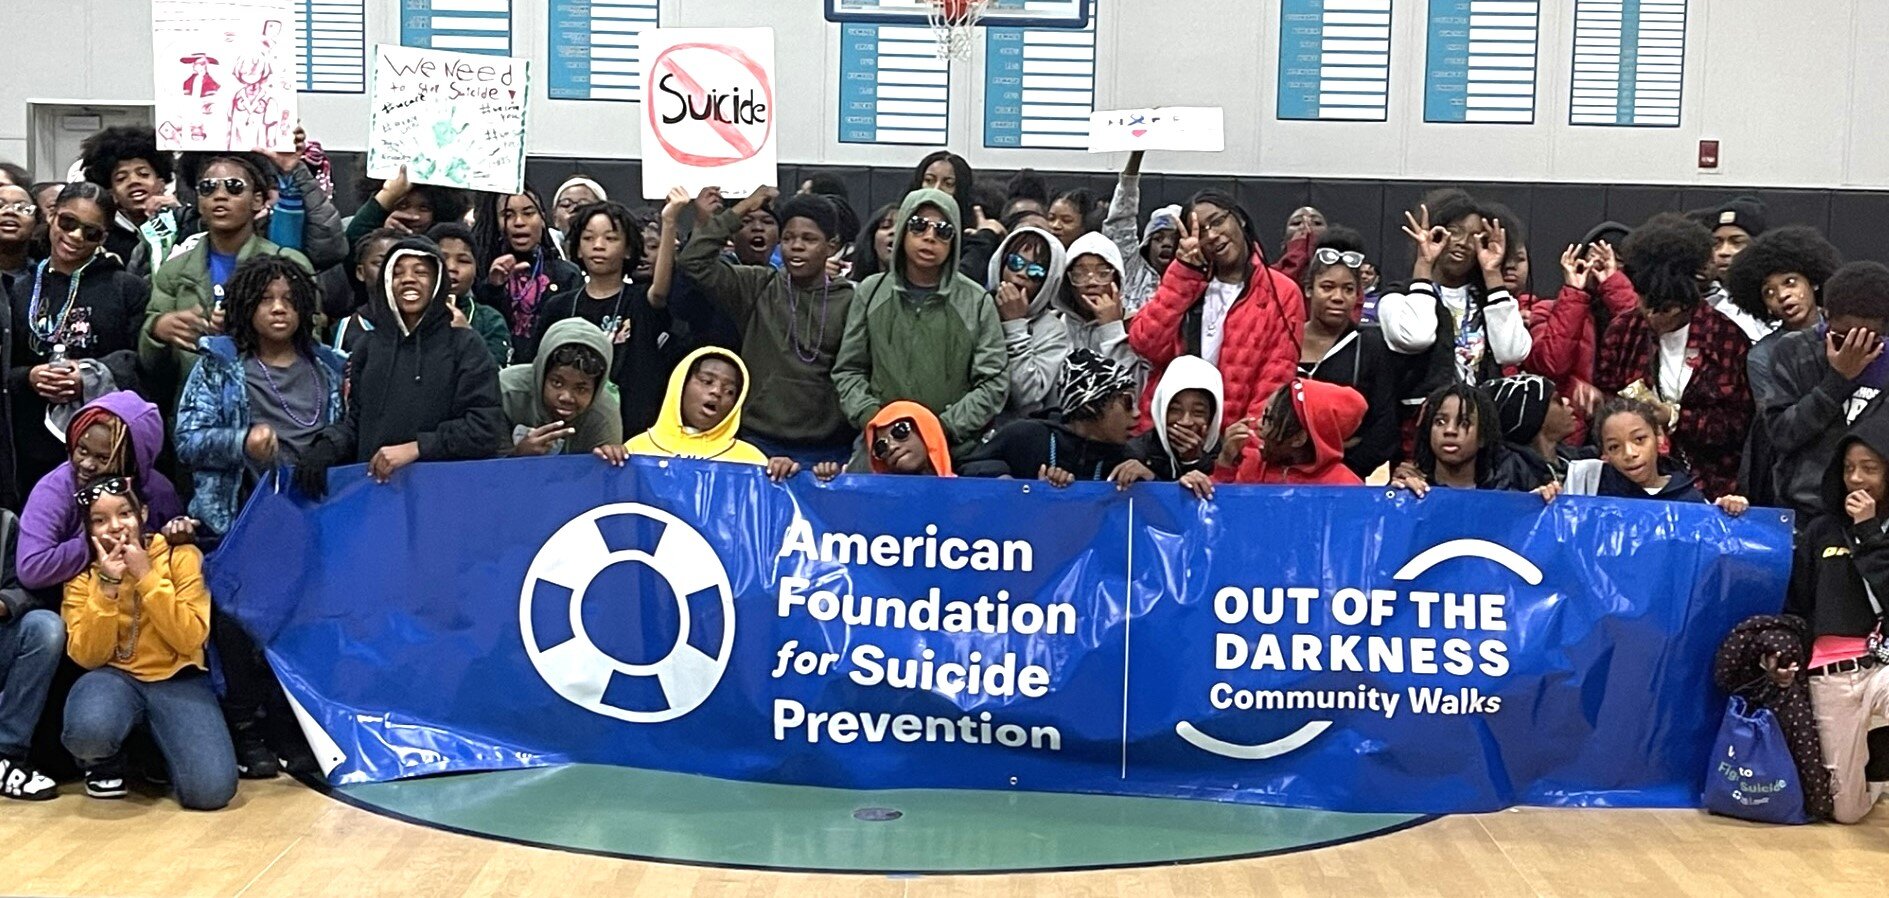 More than 500 students, staff, teachers, and volunteers participated in a Mental Health Fair and Walk at Detroit’s University Prep Art & Design Middle High School in October.